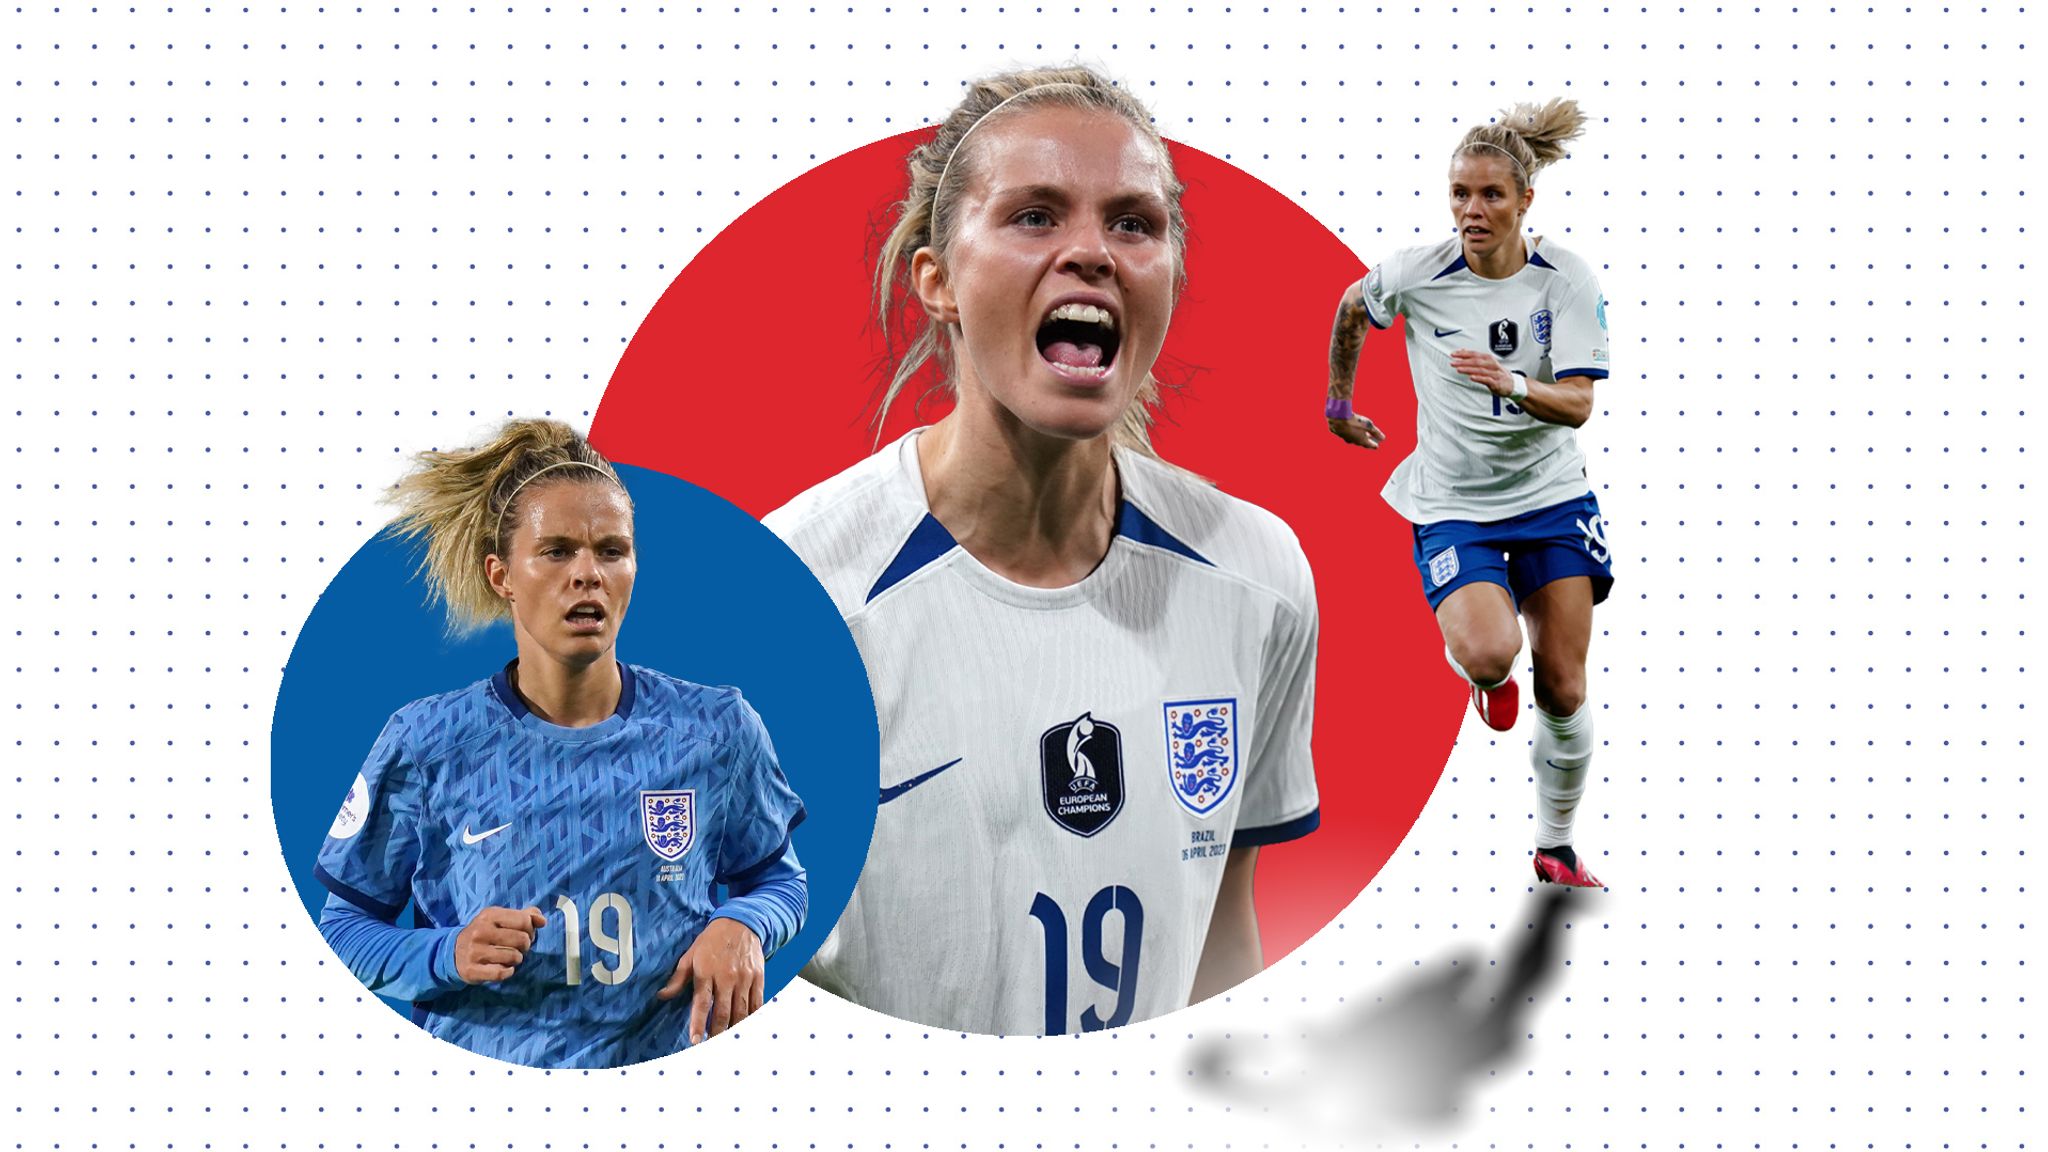 Lionesses World Cup 2023 Kits Numbers & Lettering Digital 